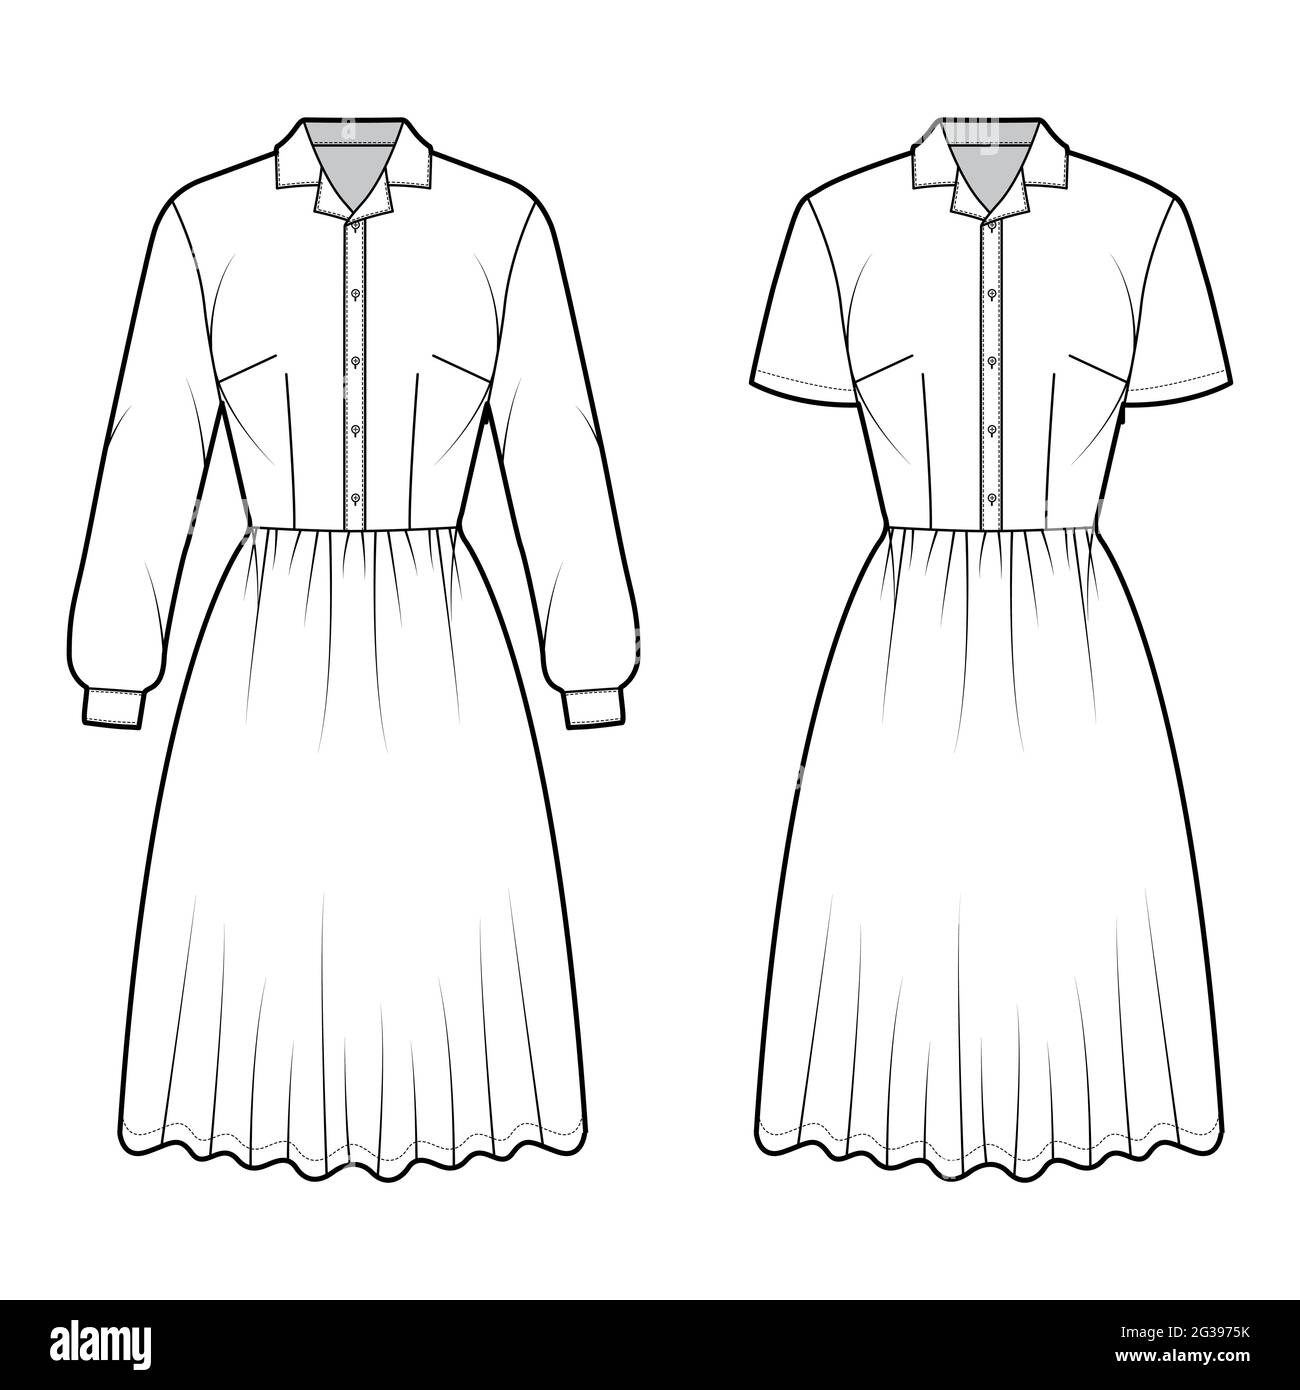 Set of Dresses house shirt technical fashion illustration with long short sleeves, knee length full skirt, classic henley collar. Flat apparel front, white color style. Women, men unisex CAD mockup Stock Vector